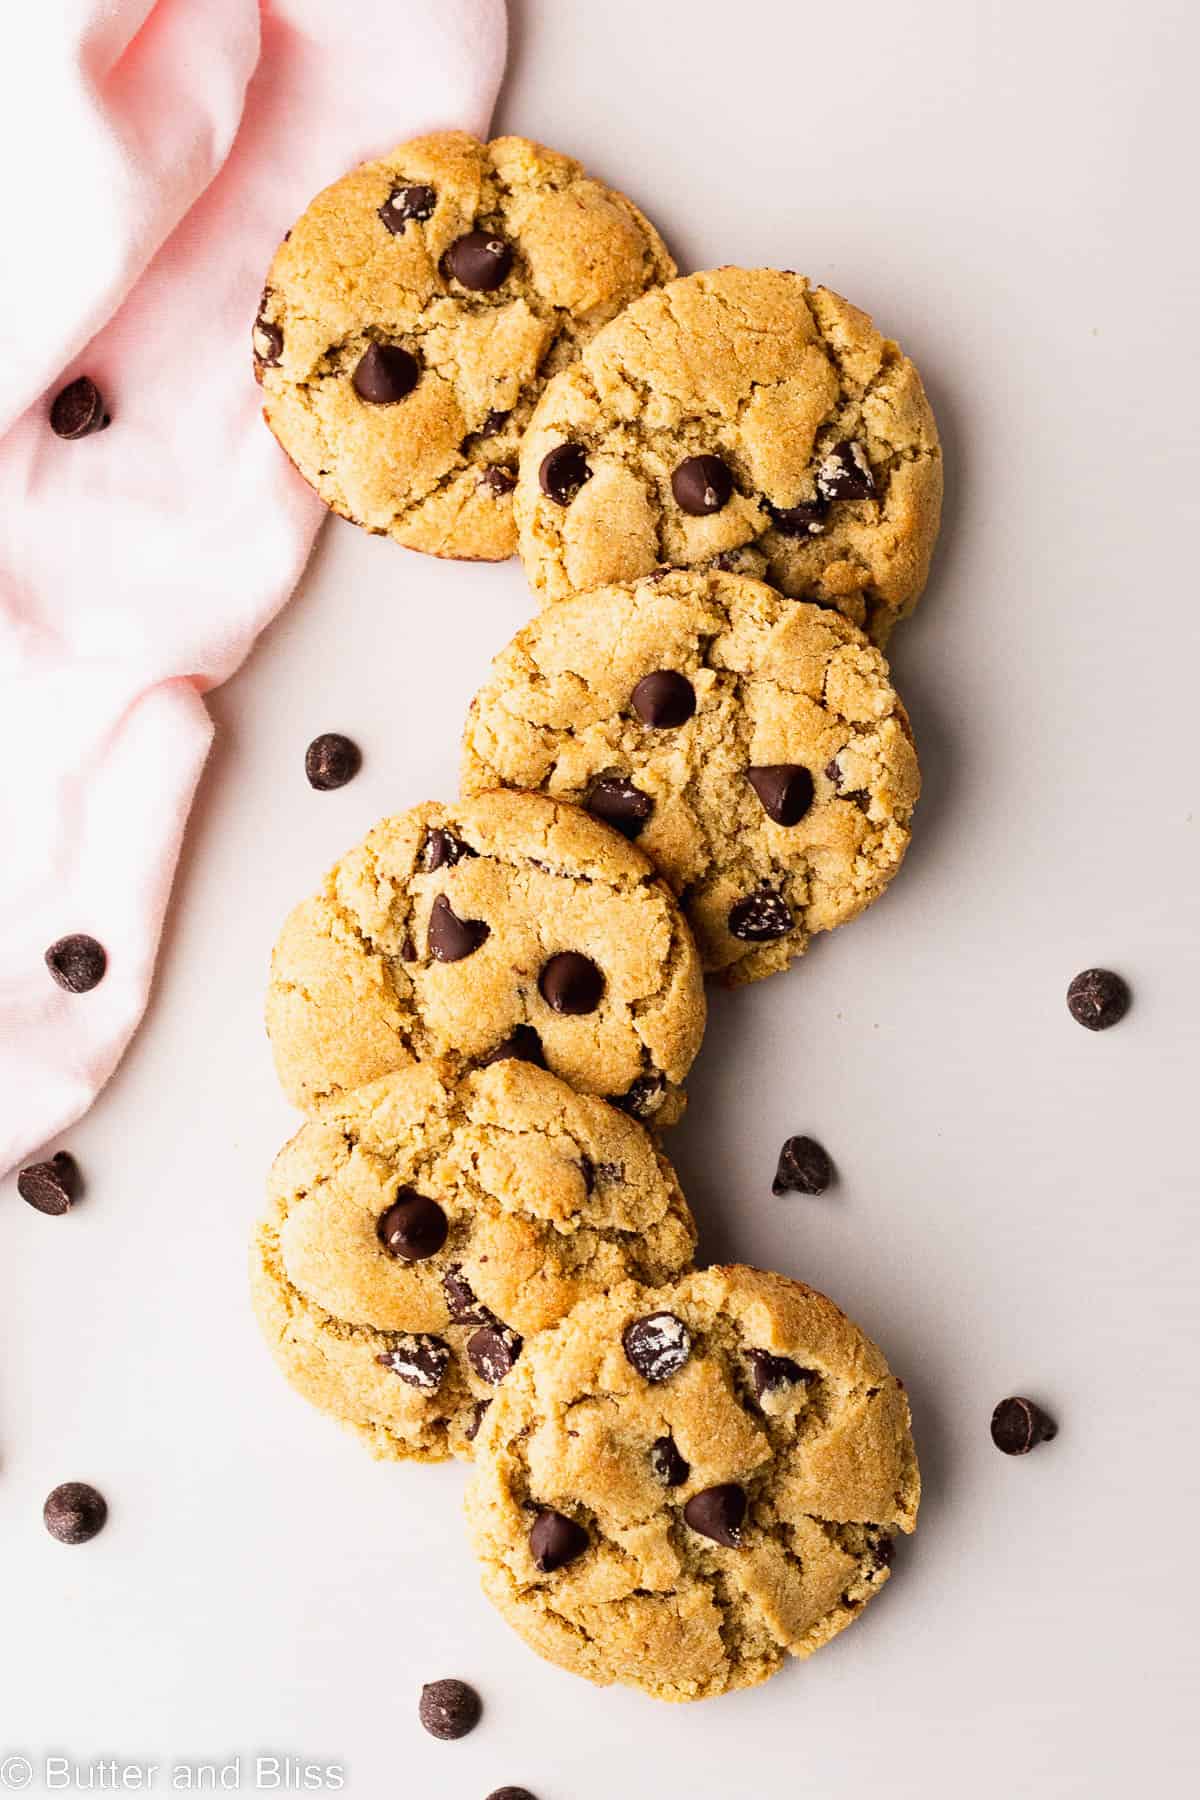 Perfectly round chocolate chip gluten free cookies arranged in a curvy line on a table.